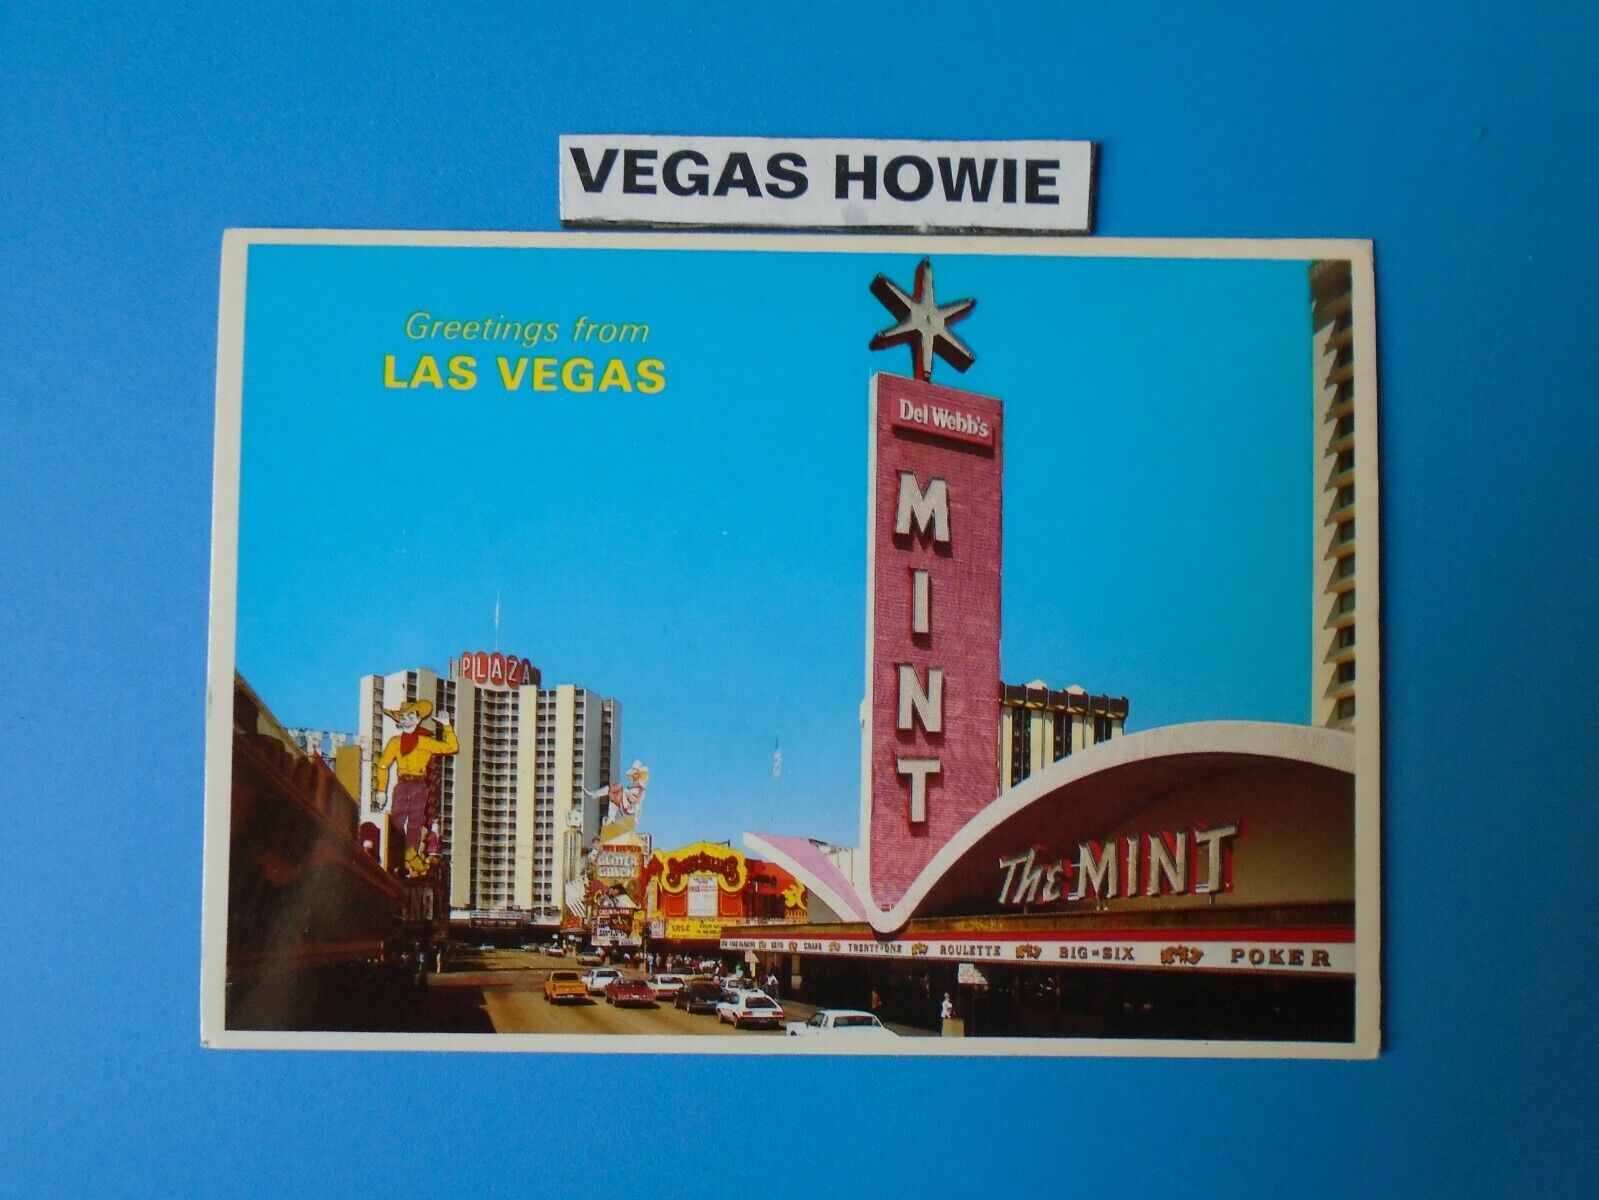 VEGAS HOWIE 1 FREMONT ST. PLAZA MINT VIC HOWDY VINTAGE EARLY AERIAL OLD VIEW